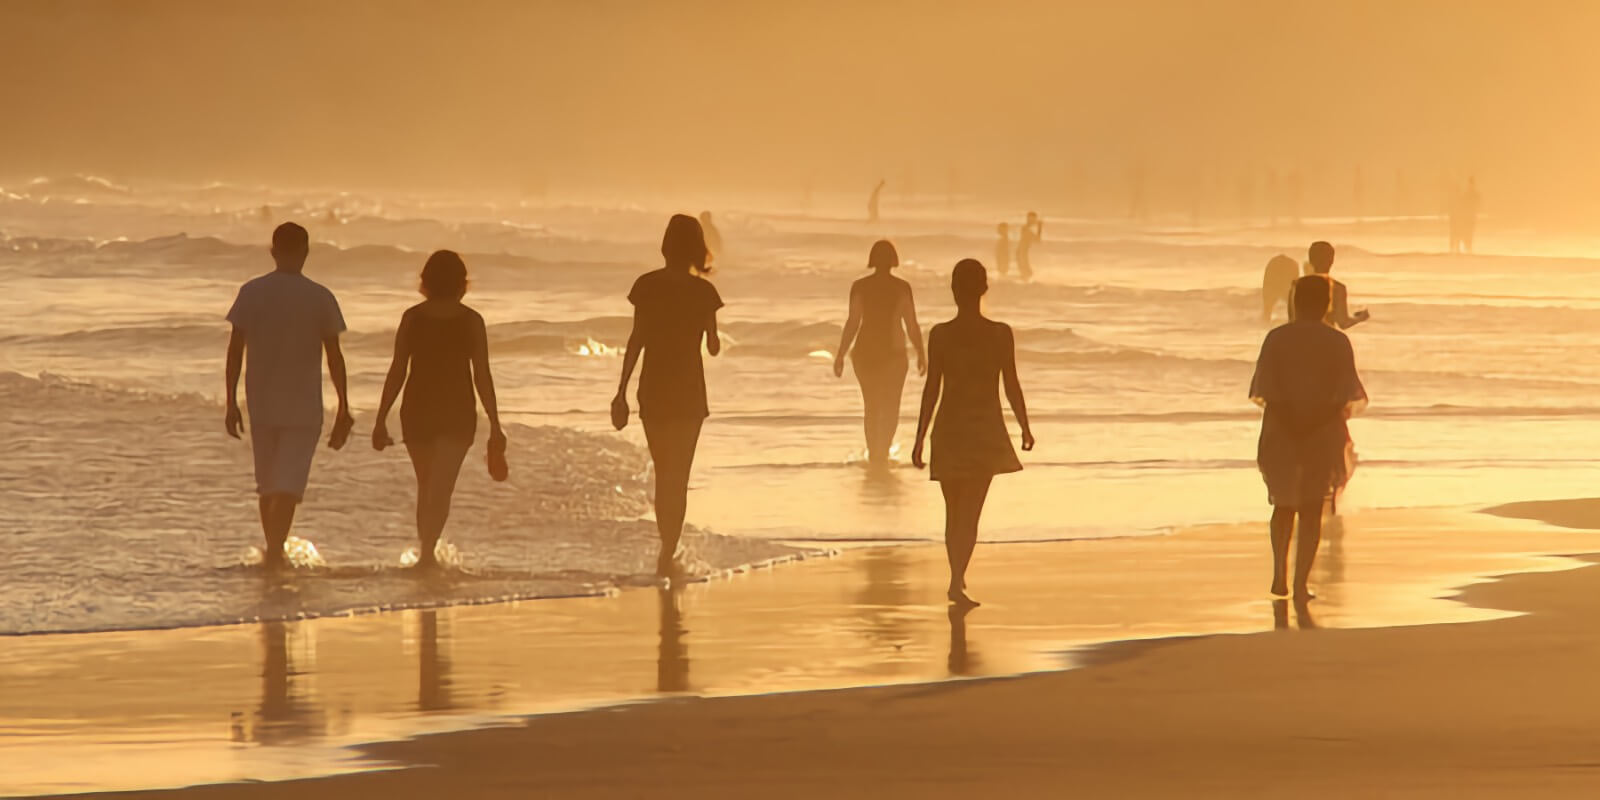 A group of people walk at a misty beach together during sunset.